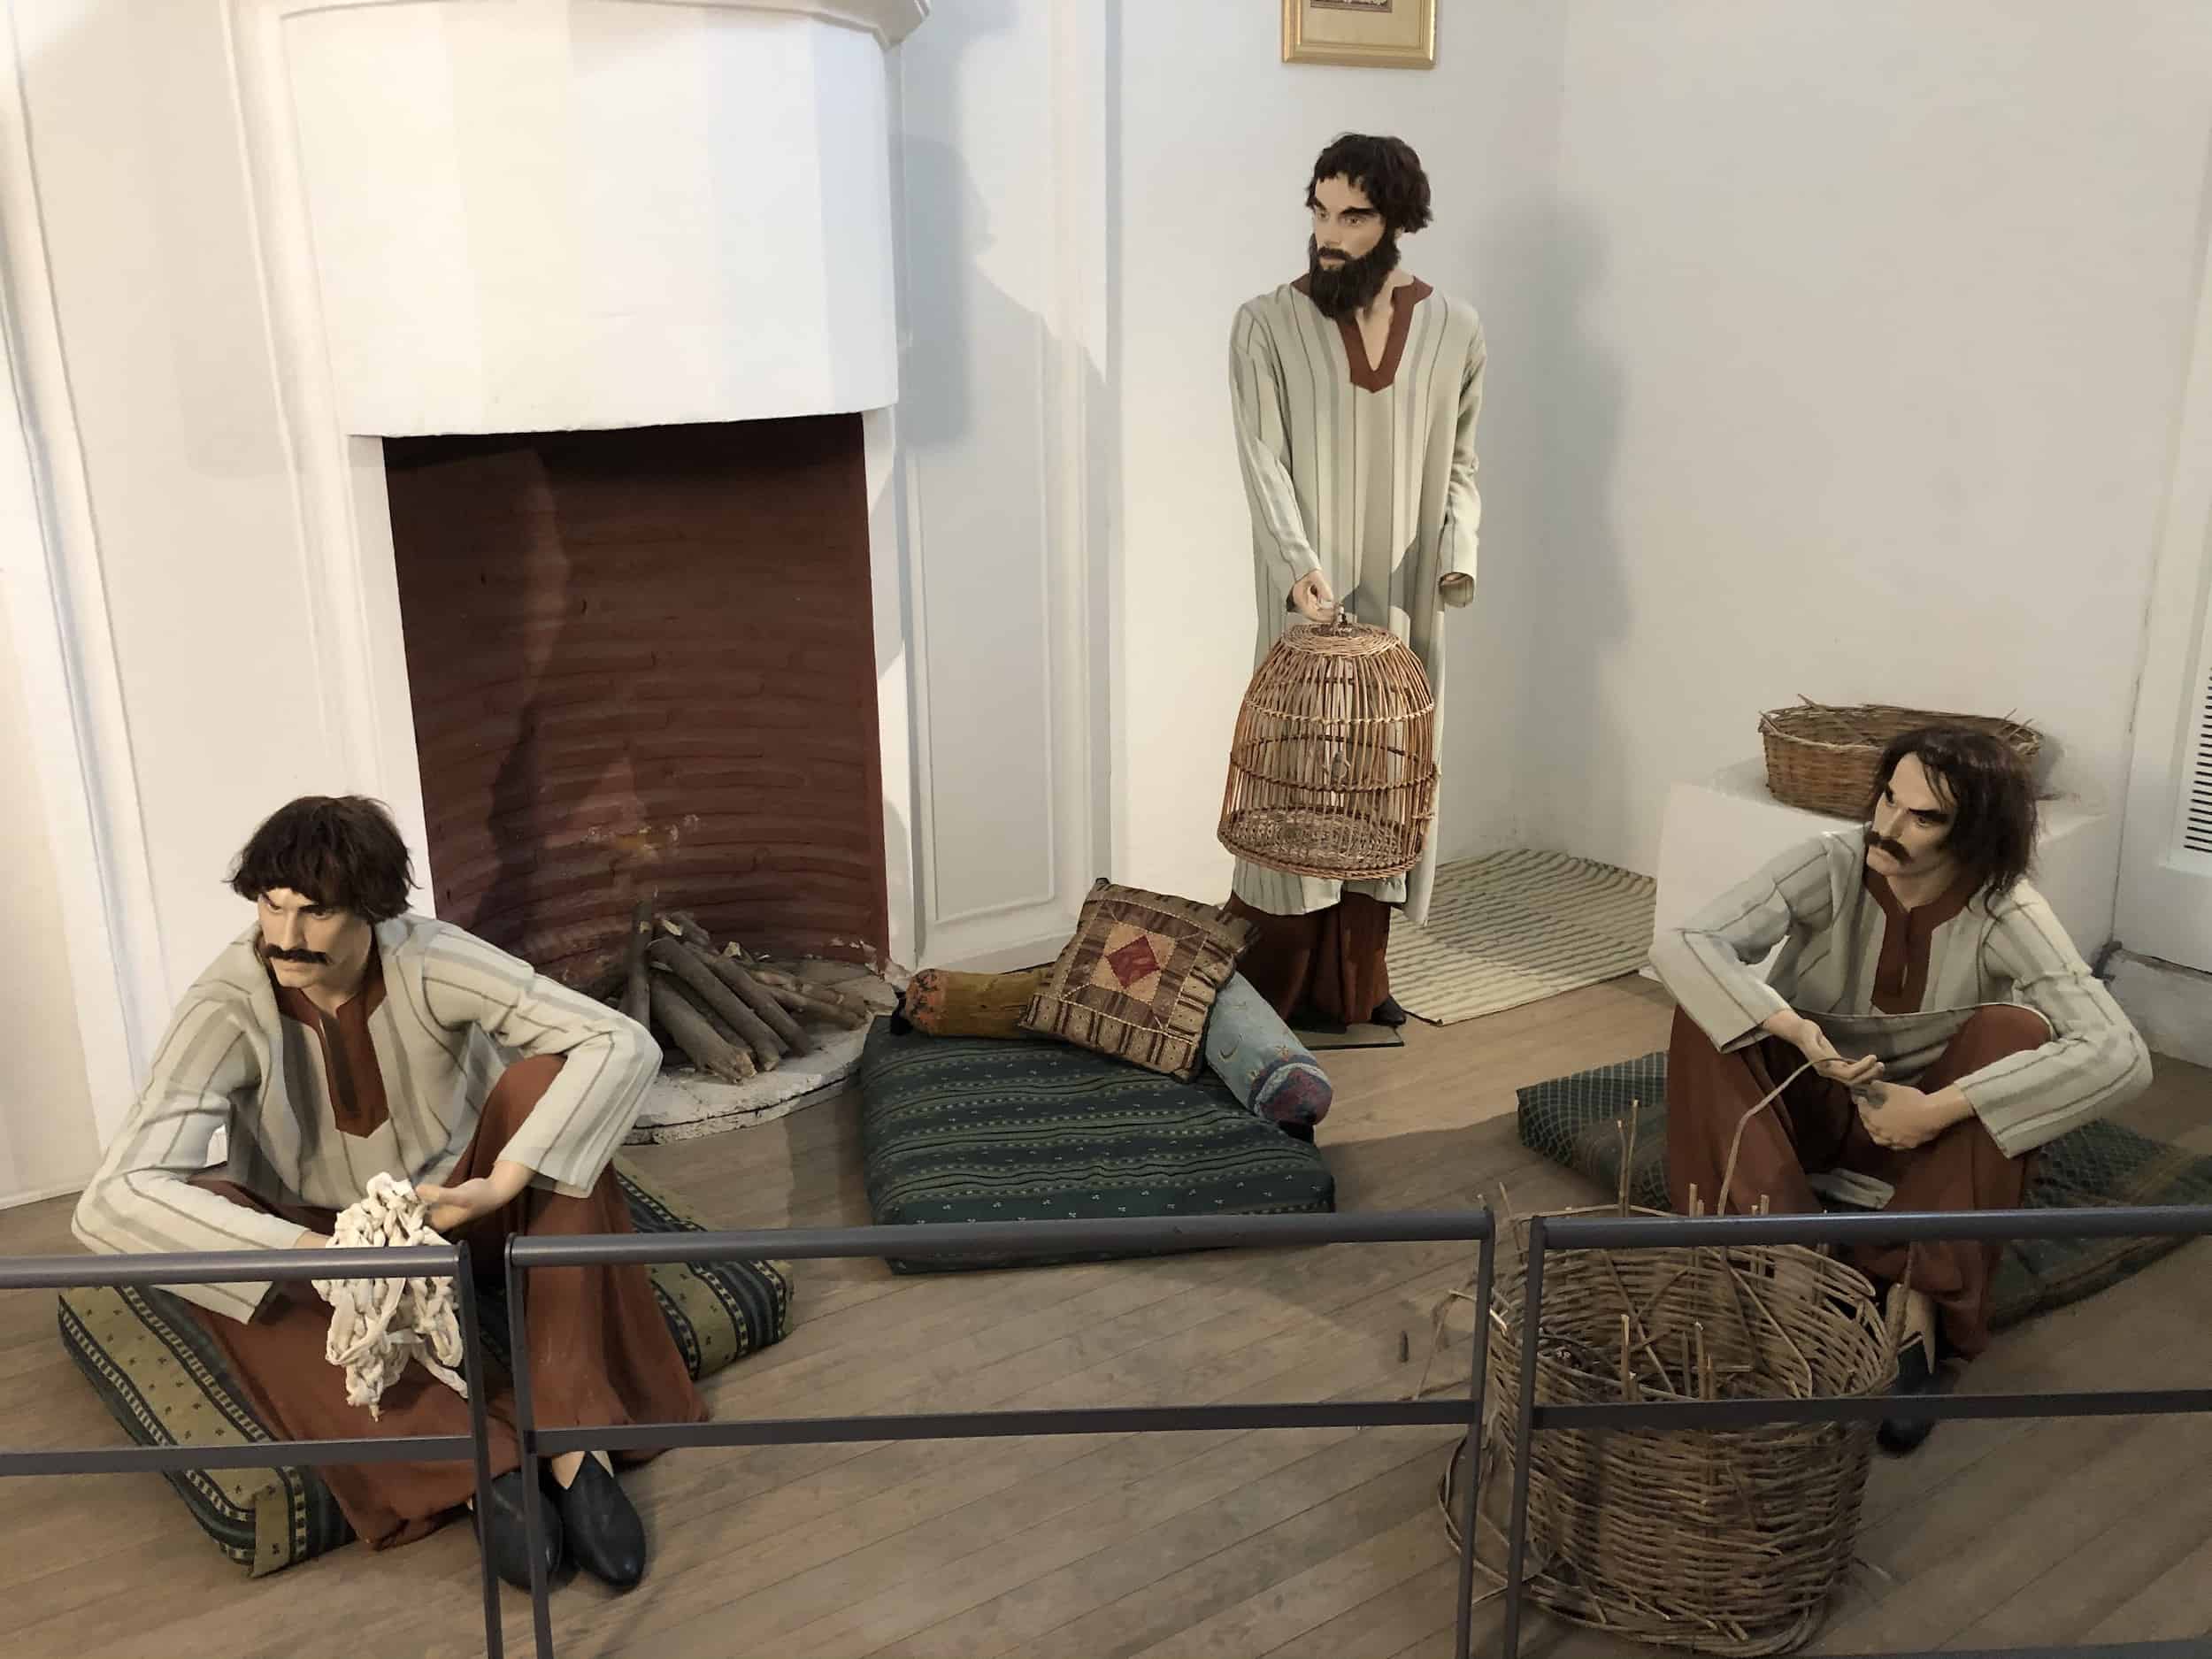 Psychiatric Patients at the Complex of Sultan Bayezid II Health Museum in Edirne